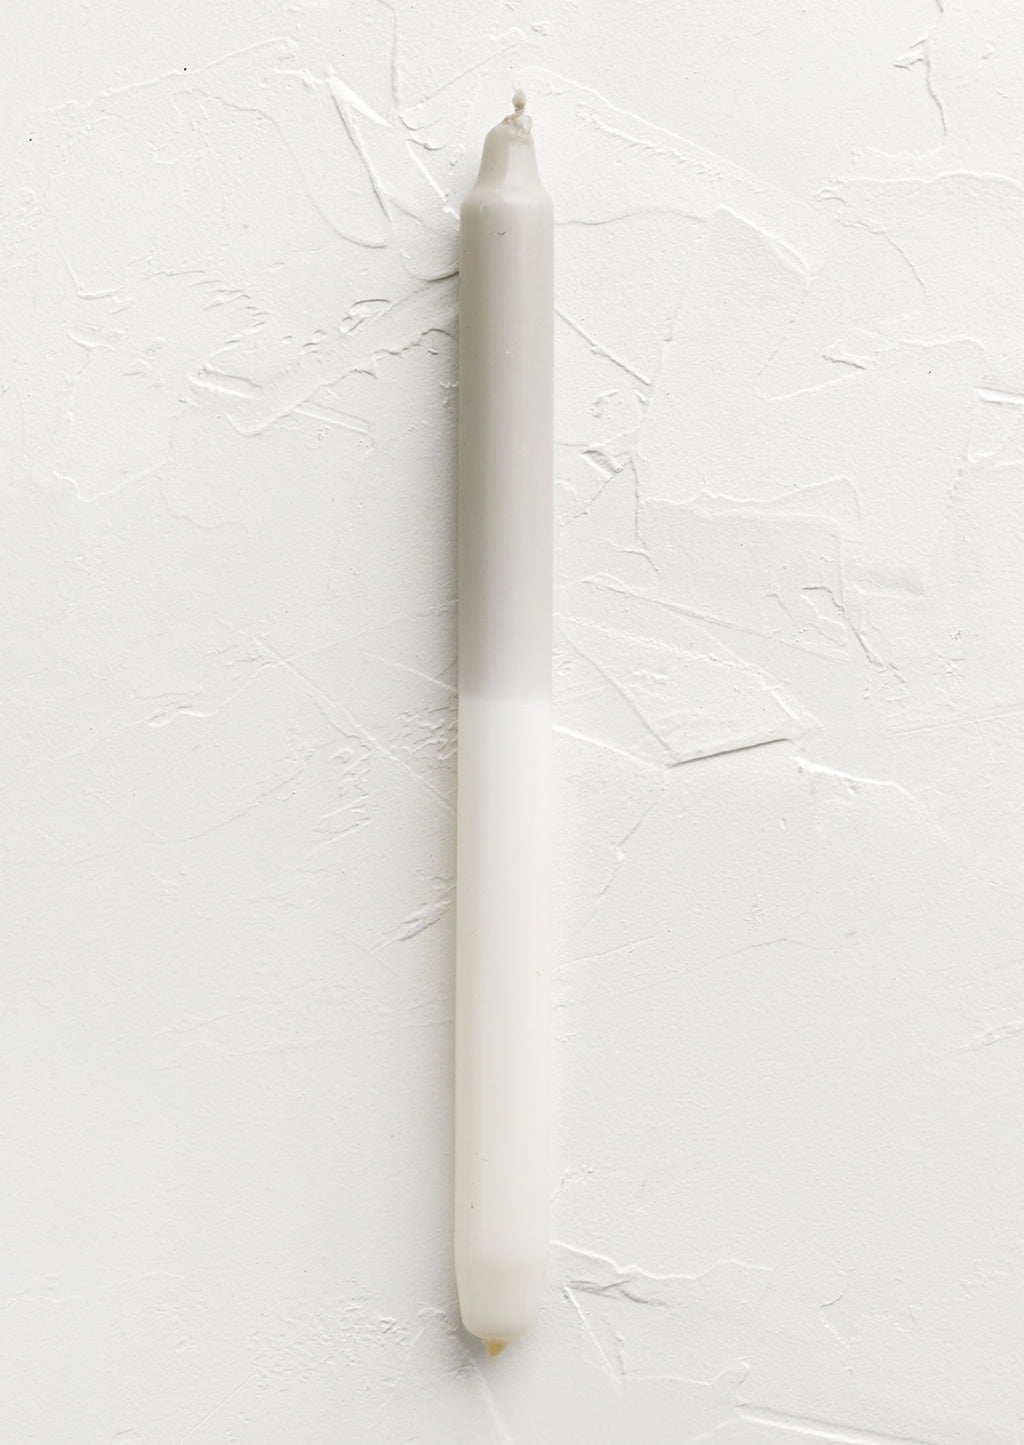 Ivory / Taupe: A straight taper candle in taupe and white.